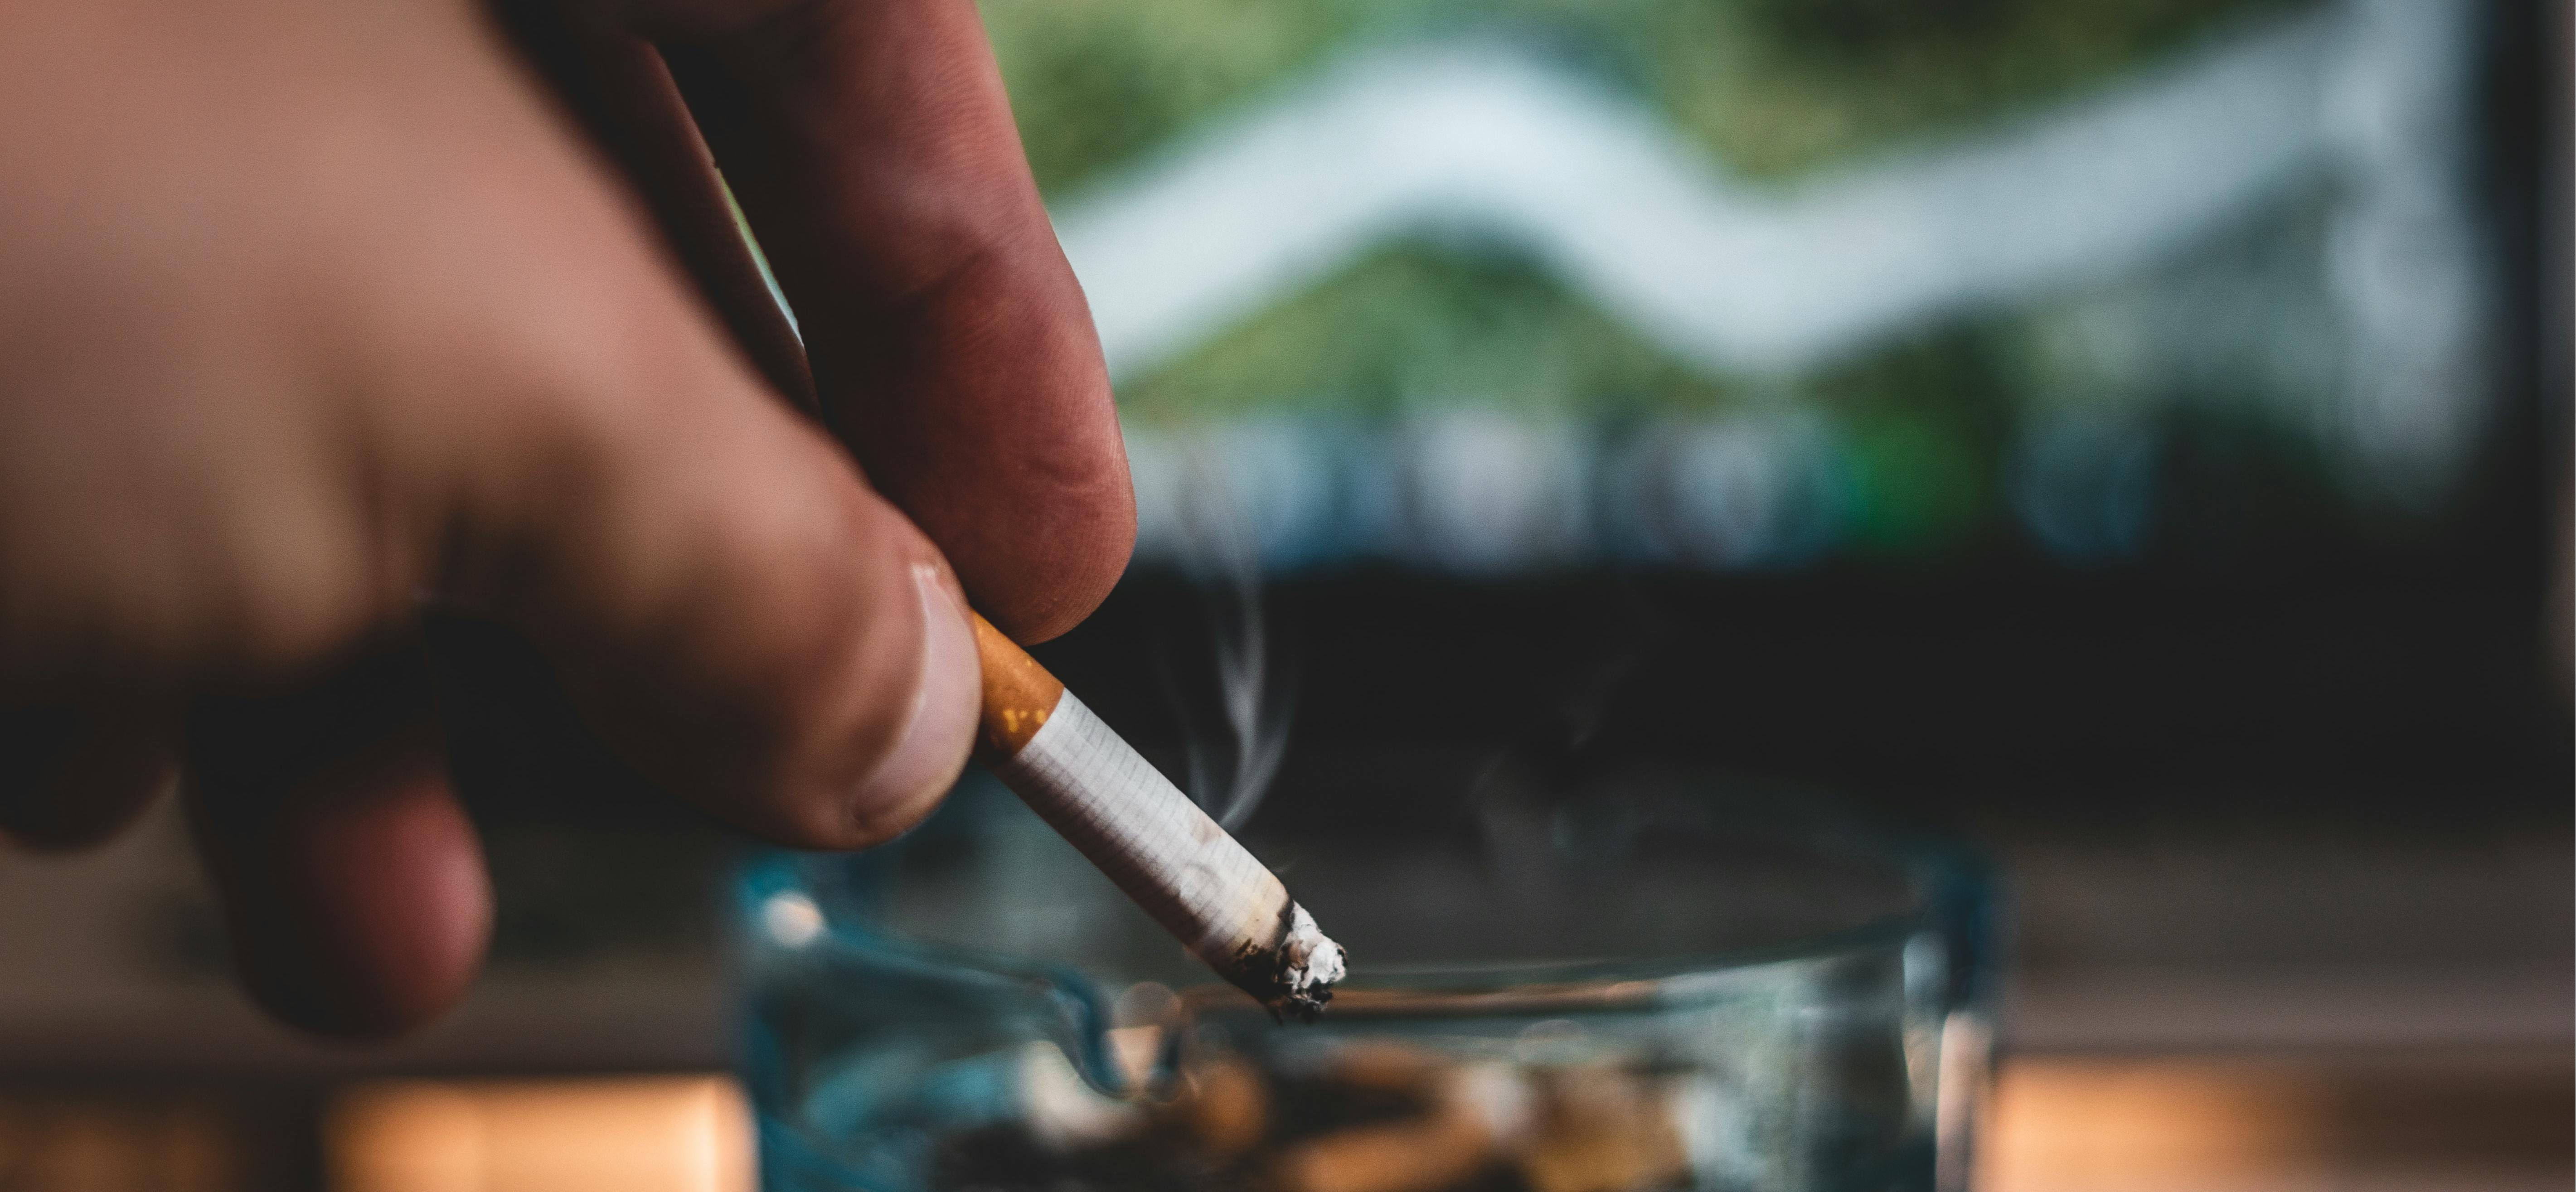 Close up of a hand stubbing out a cigarette into a glass ashtray